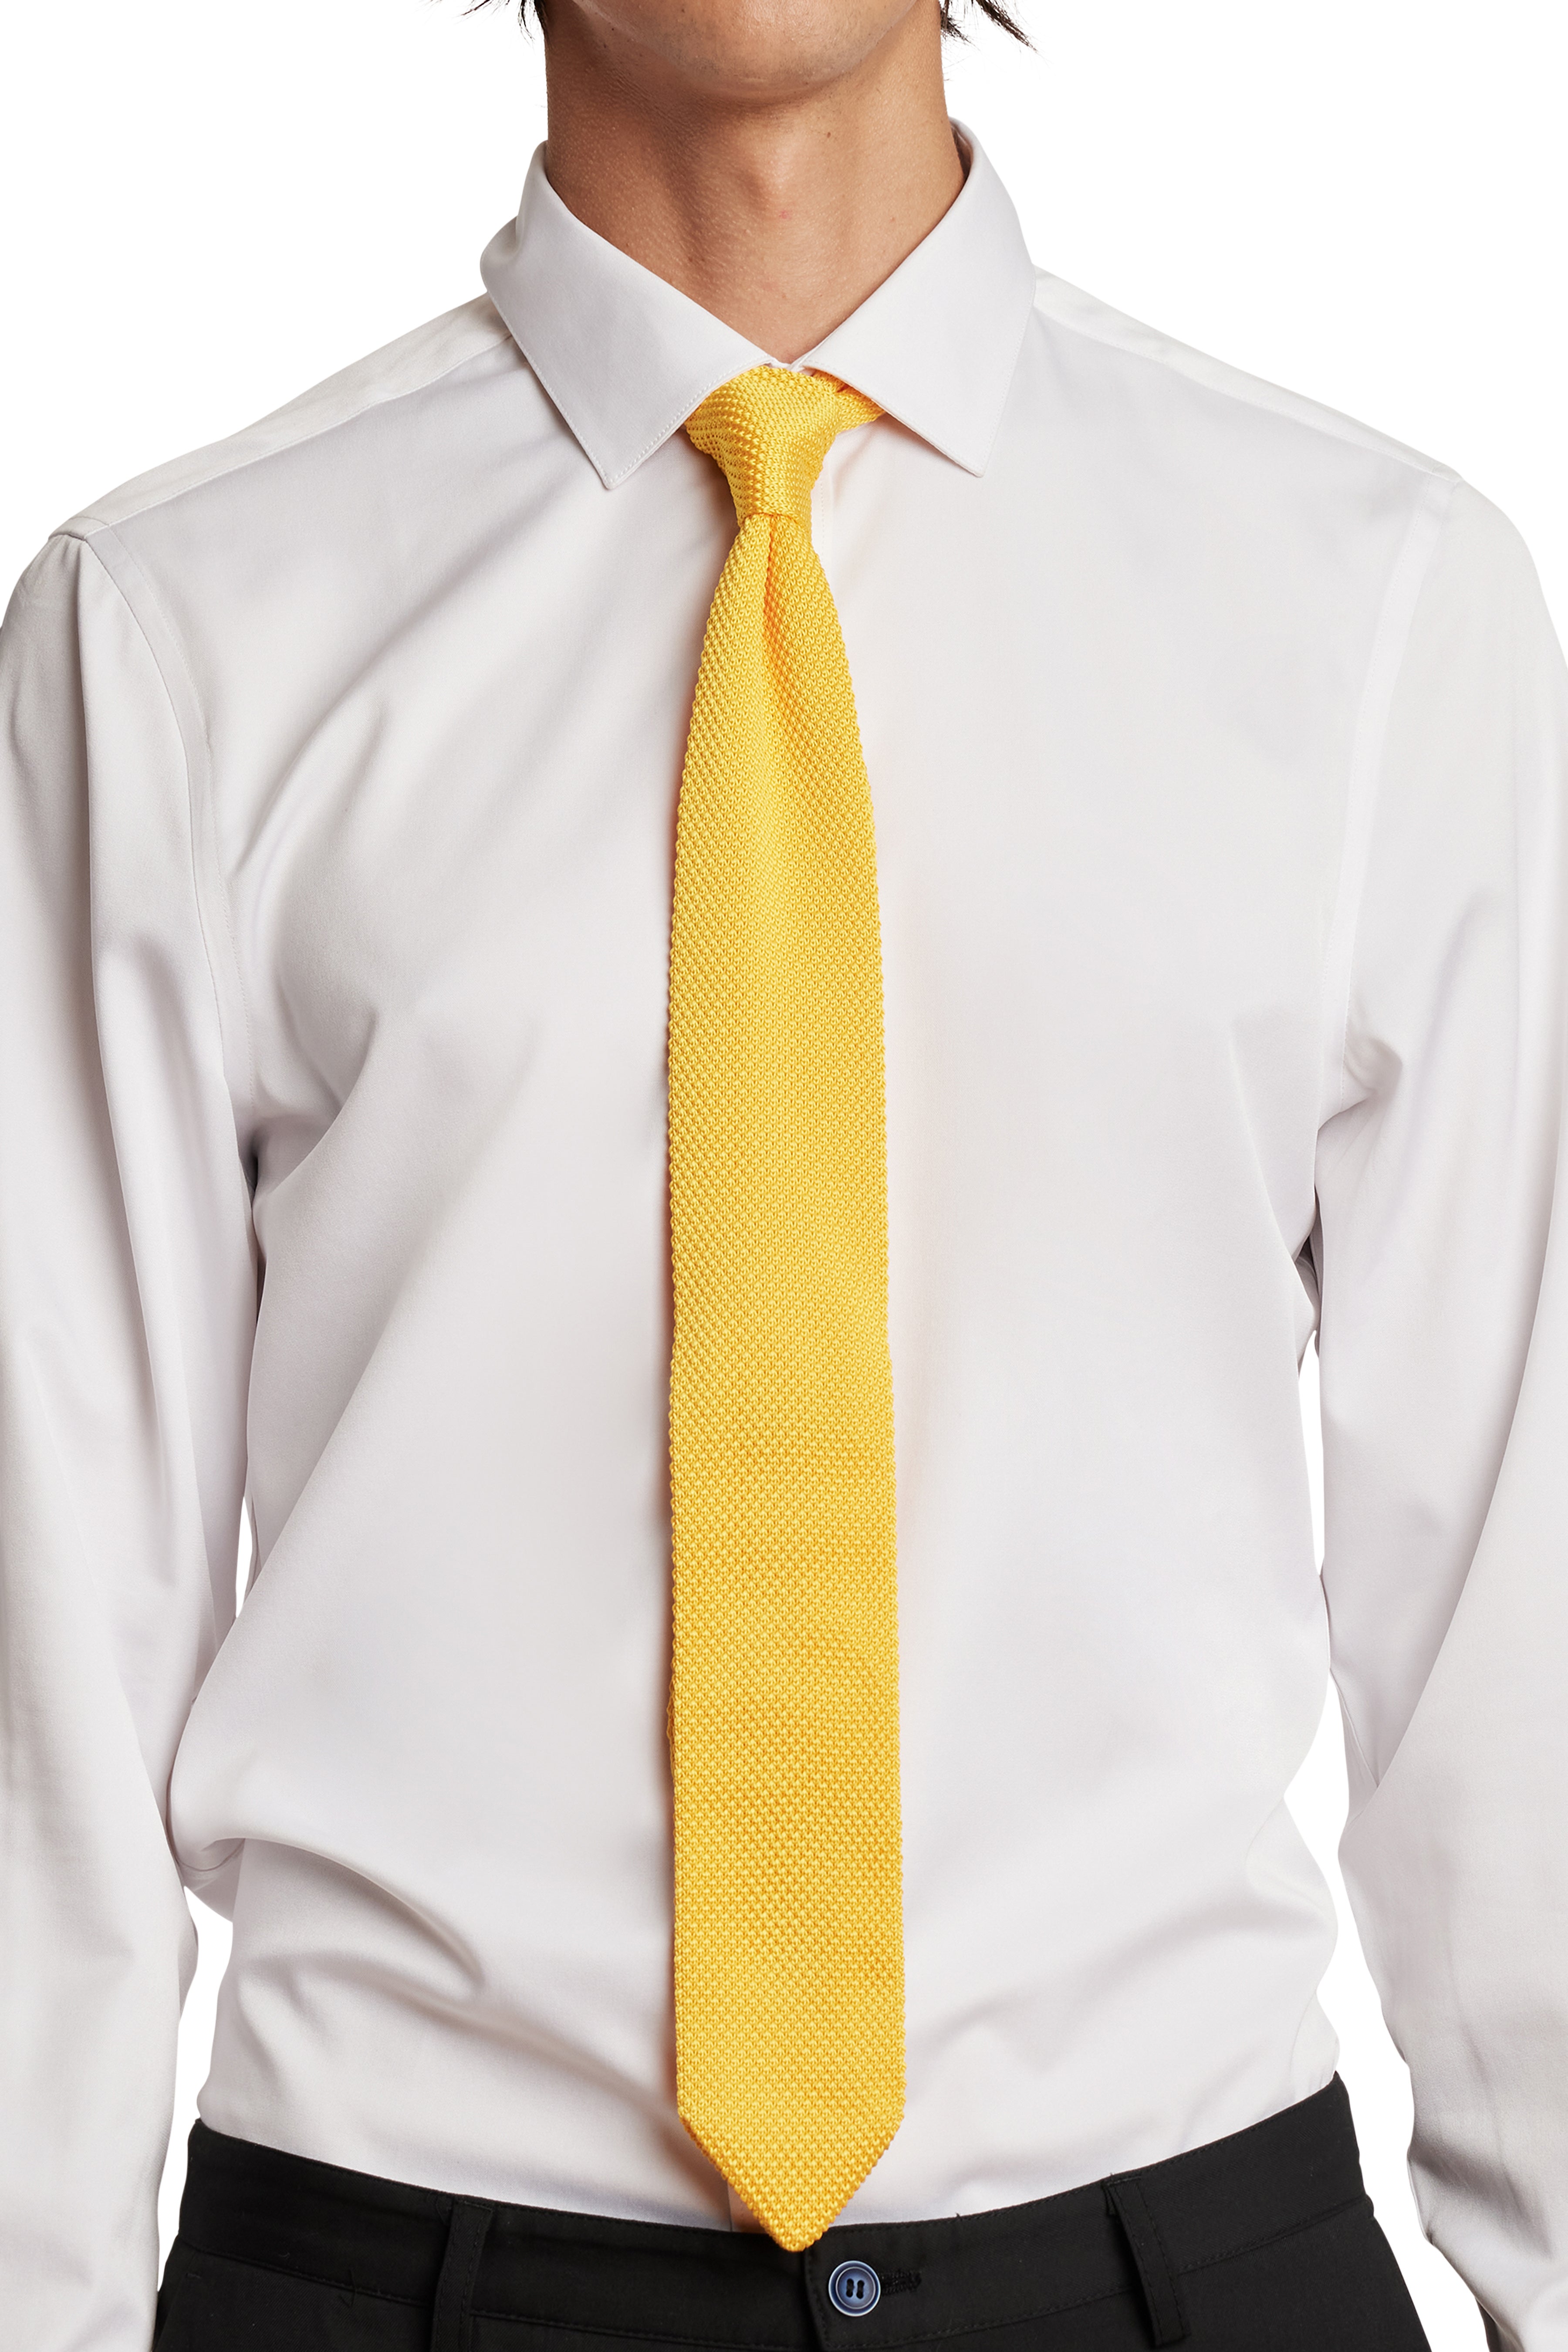 Stanley Knit Tie - Canary